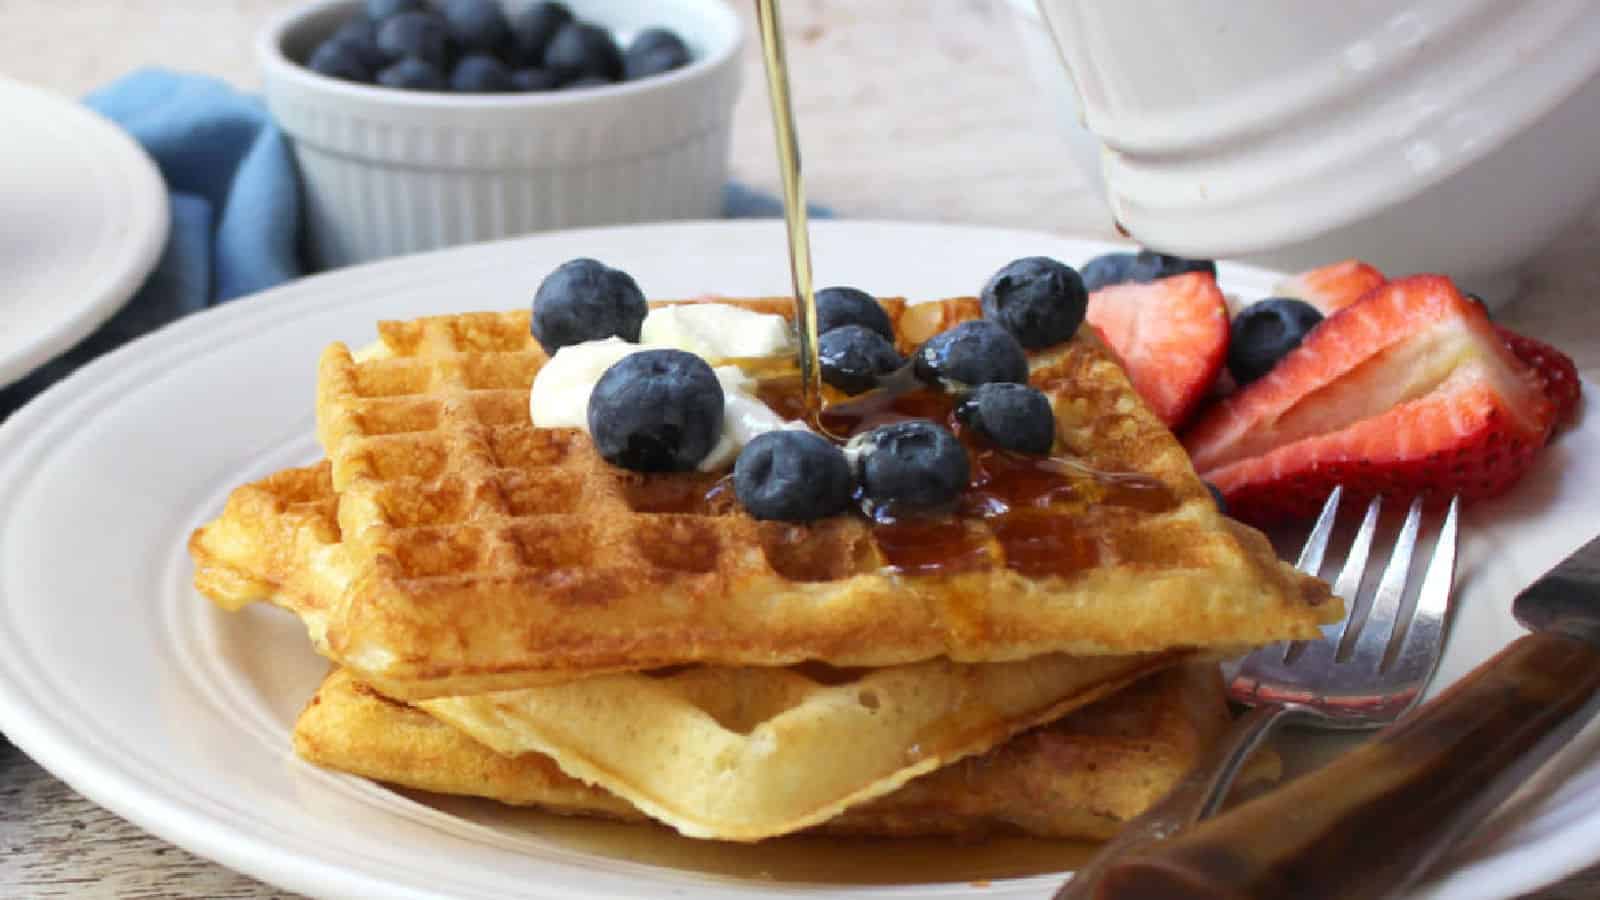 A stack of waffles with fruit and pouring syrup.